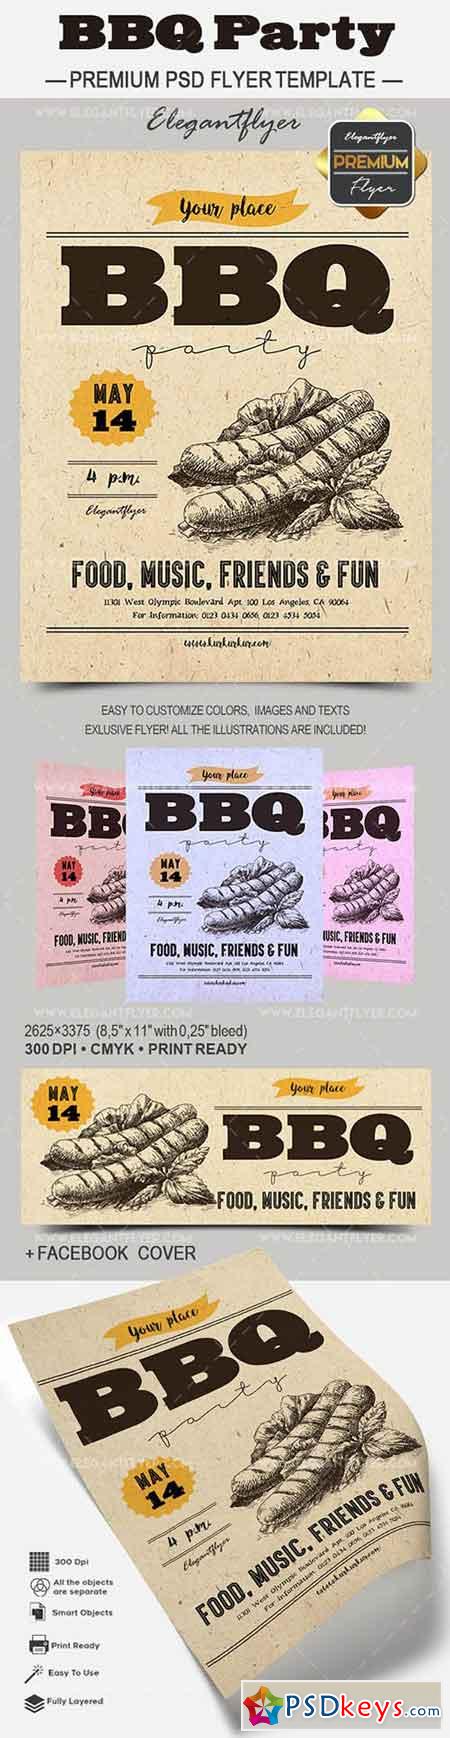 BBQ Party  Premium Flyer PSD Template + Facebook Cover